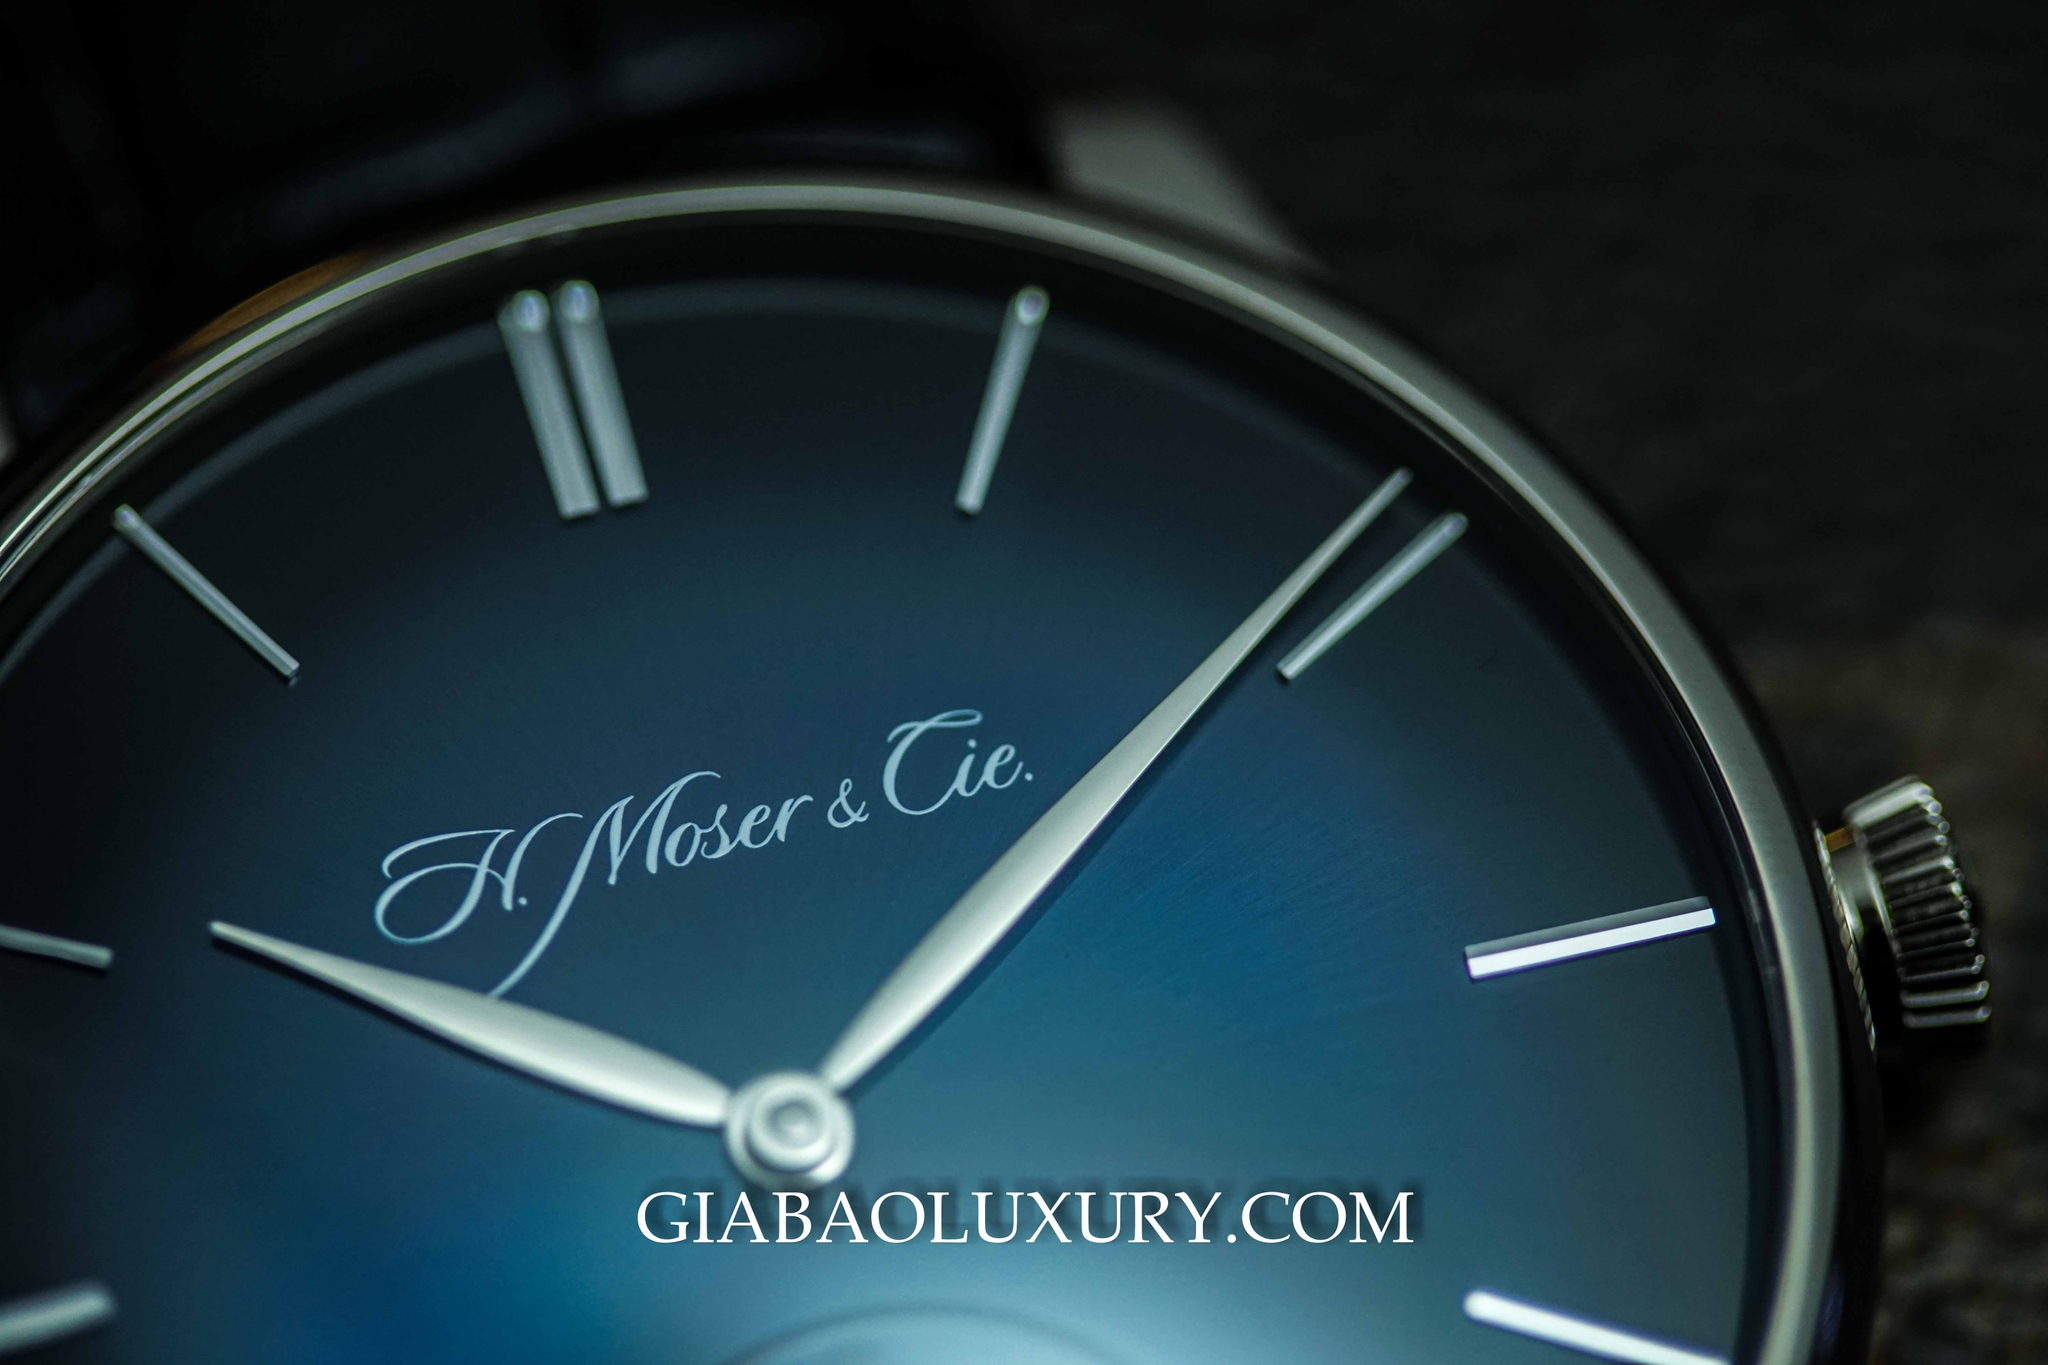 Review Chi Tiết Chiếc Đồng Hồ H. Moser & Cie Venturer Rolls Royce Small Seconds